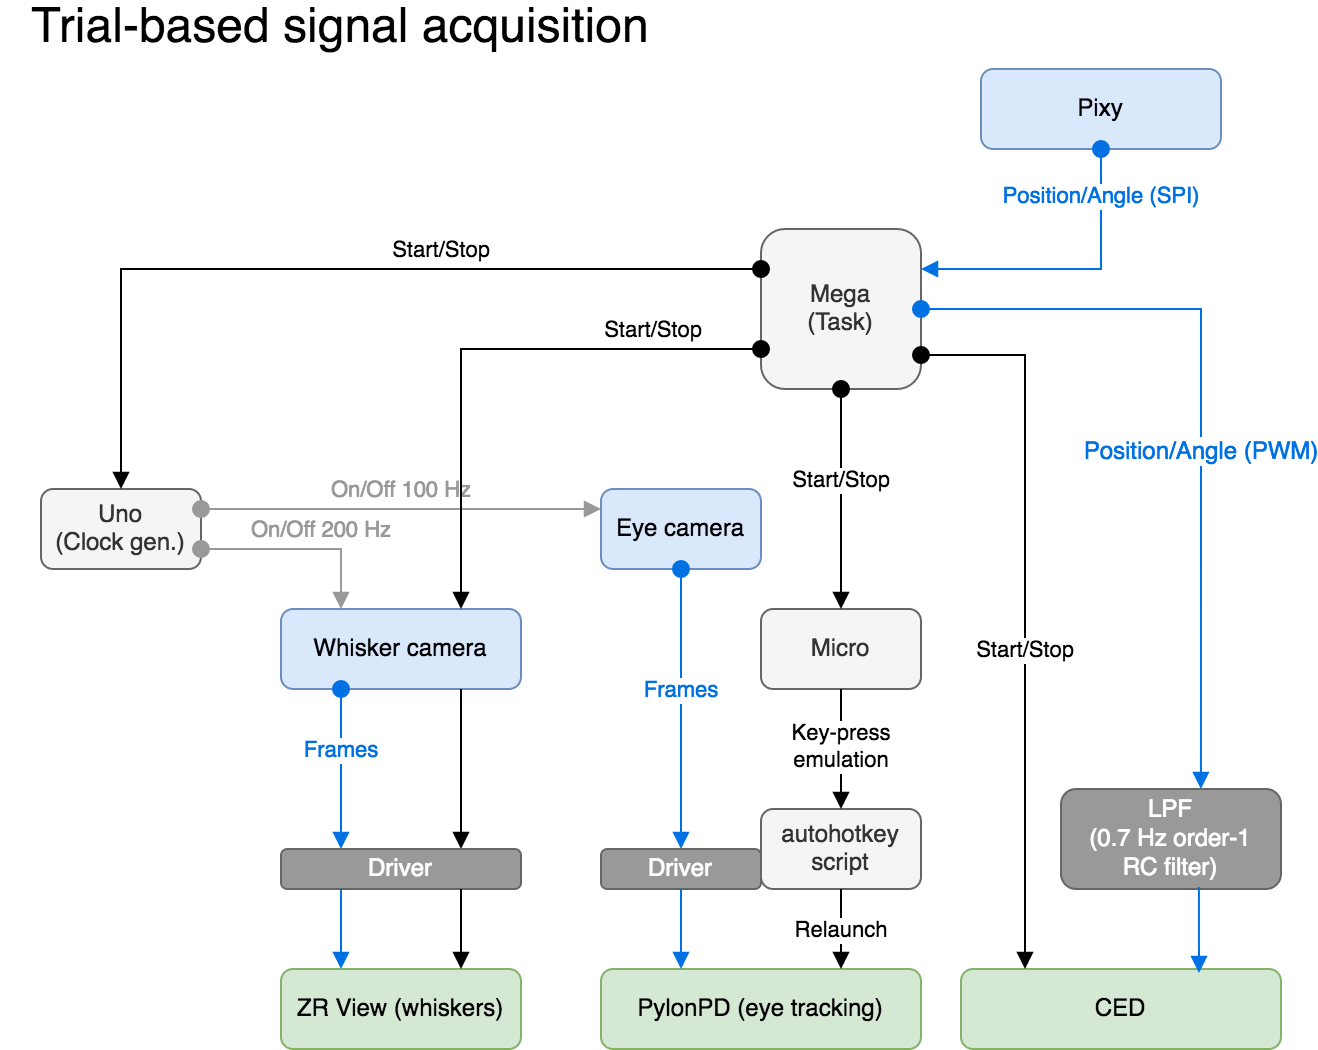 schematics of trial-based acquisition